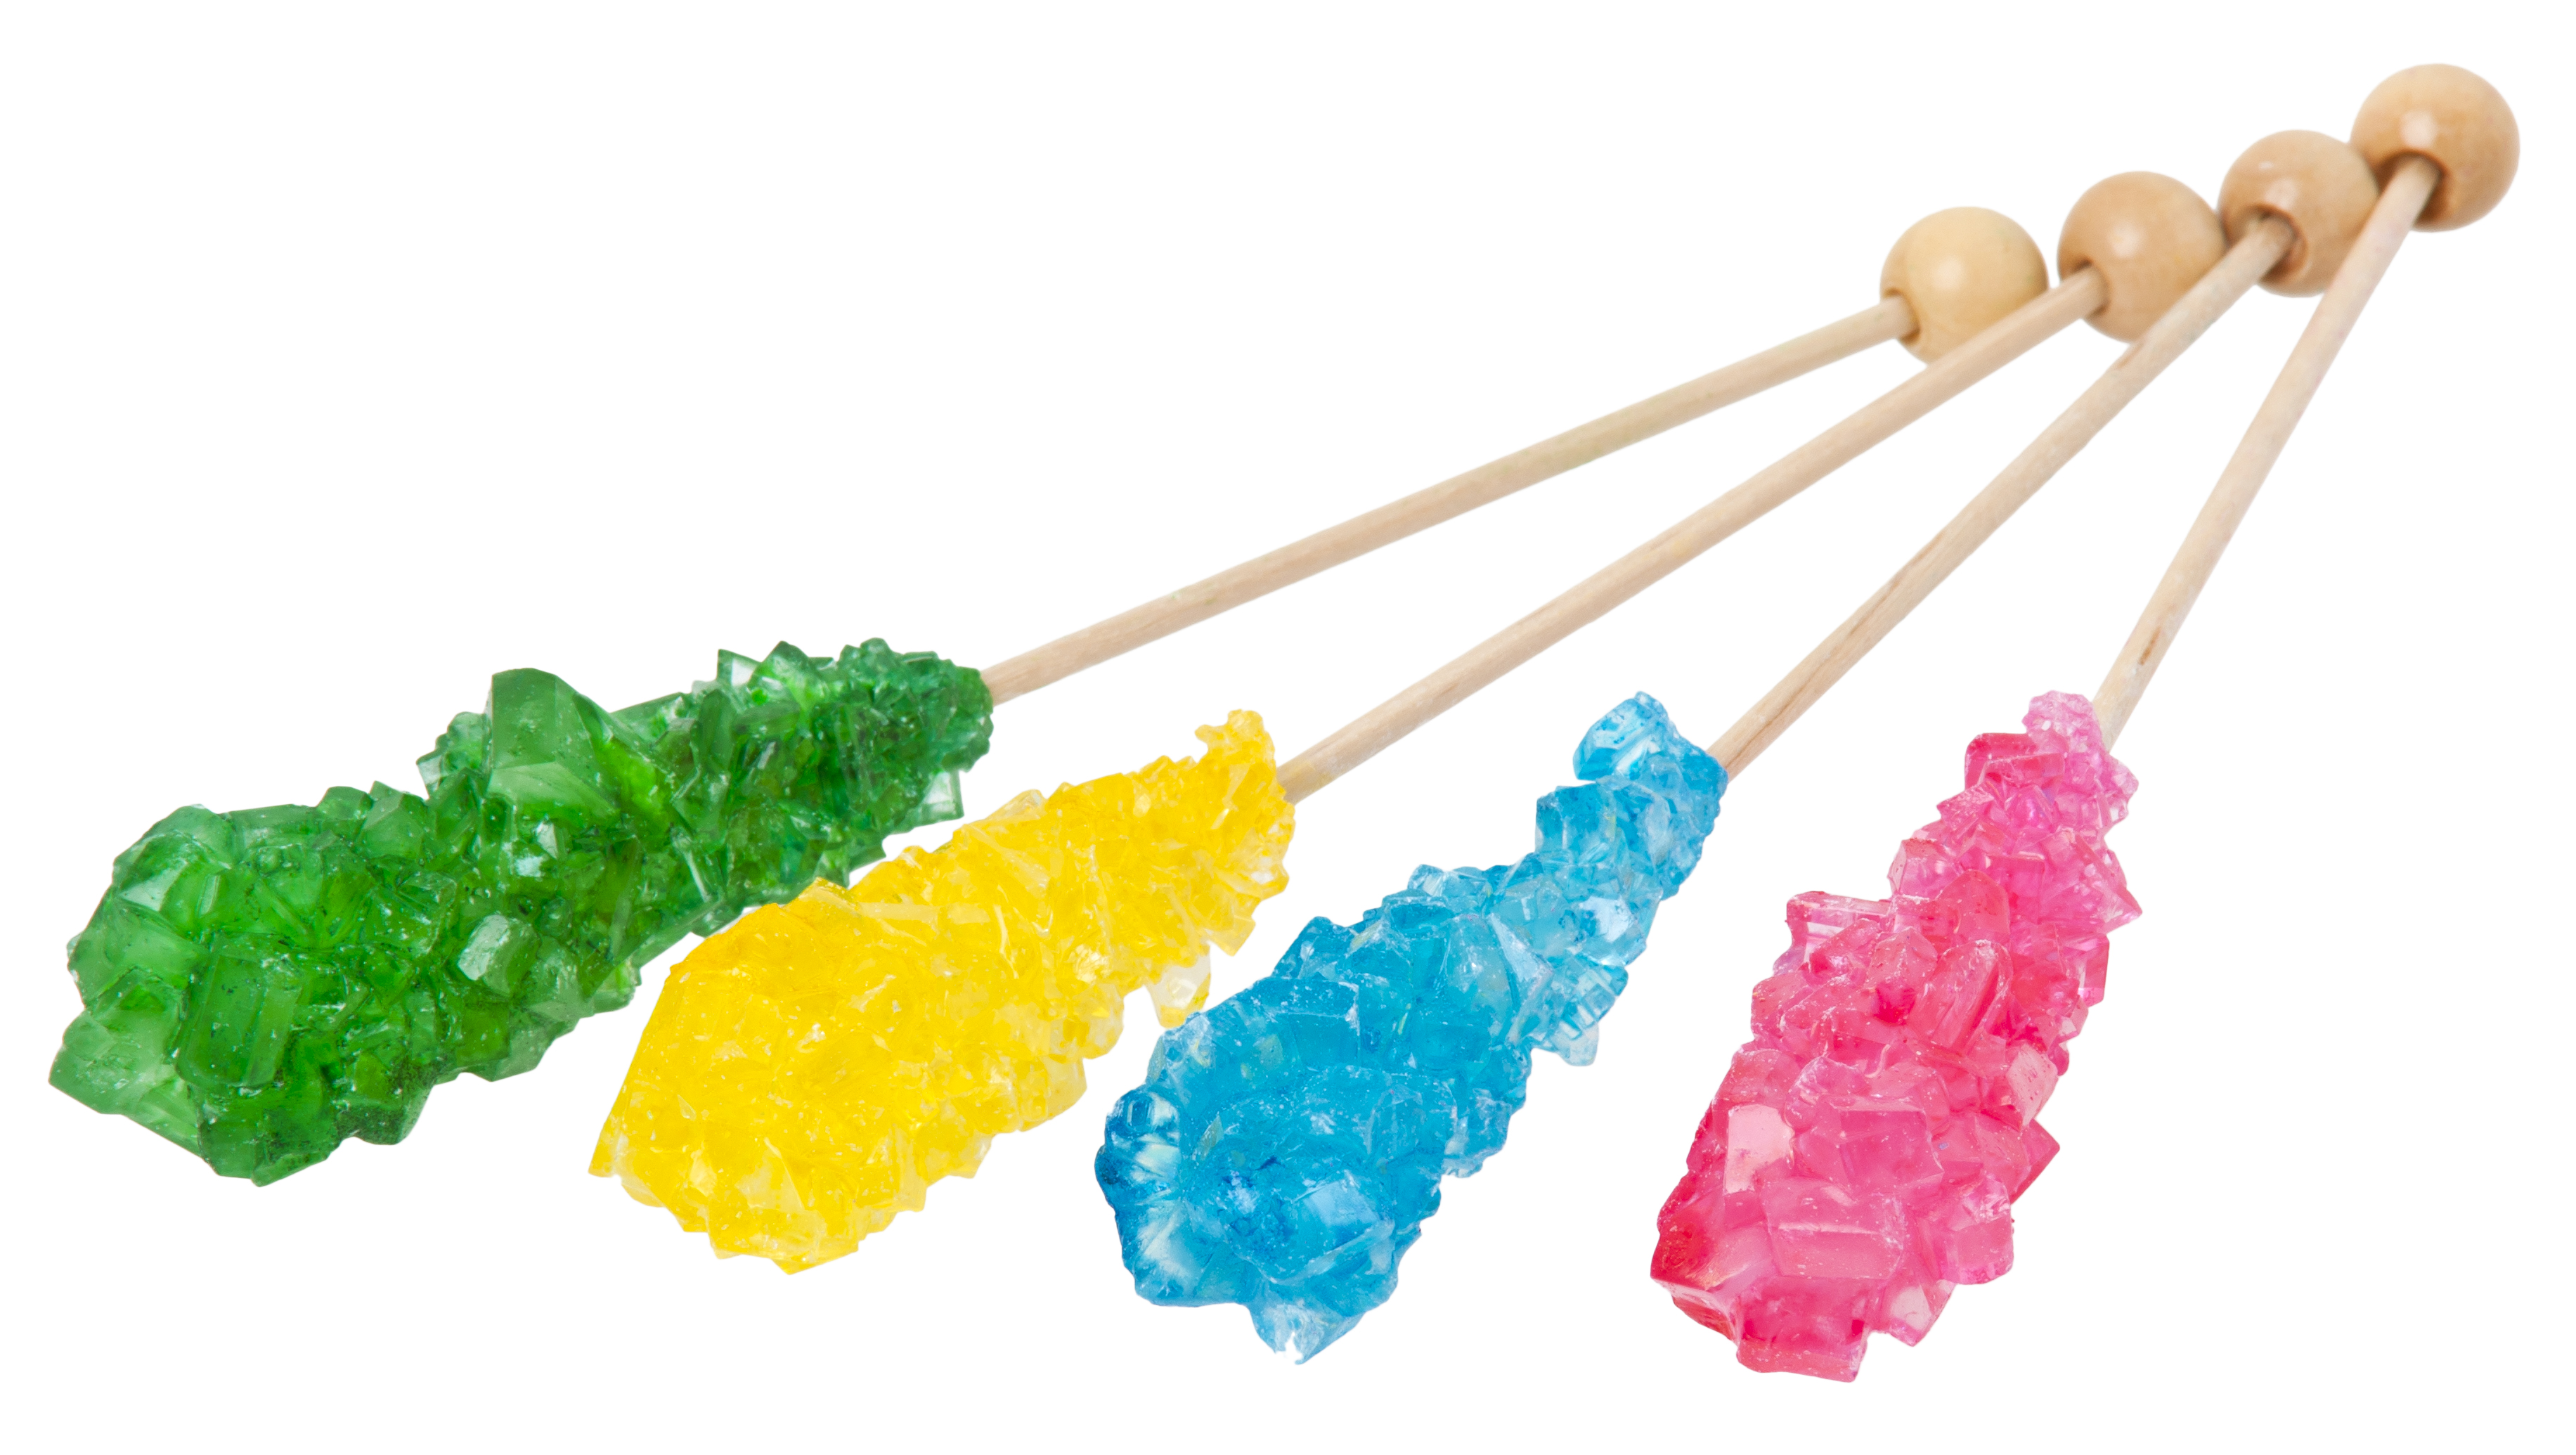 Various flavors of rock candy